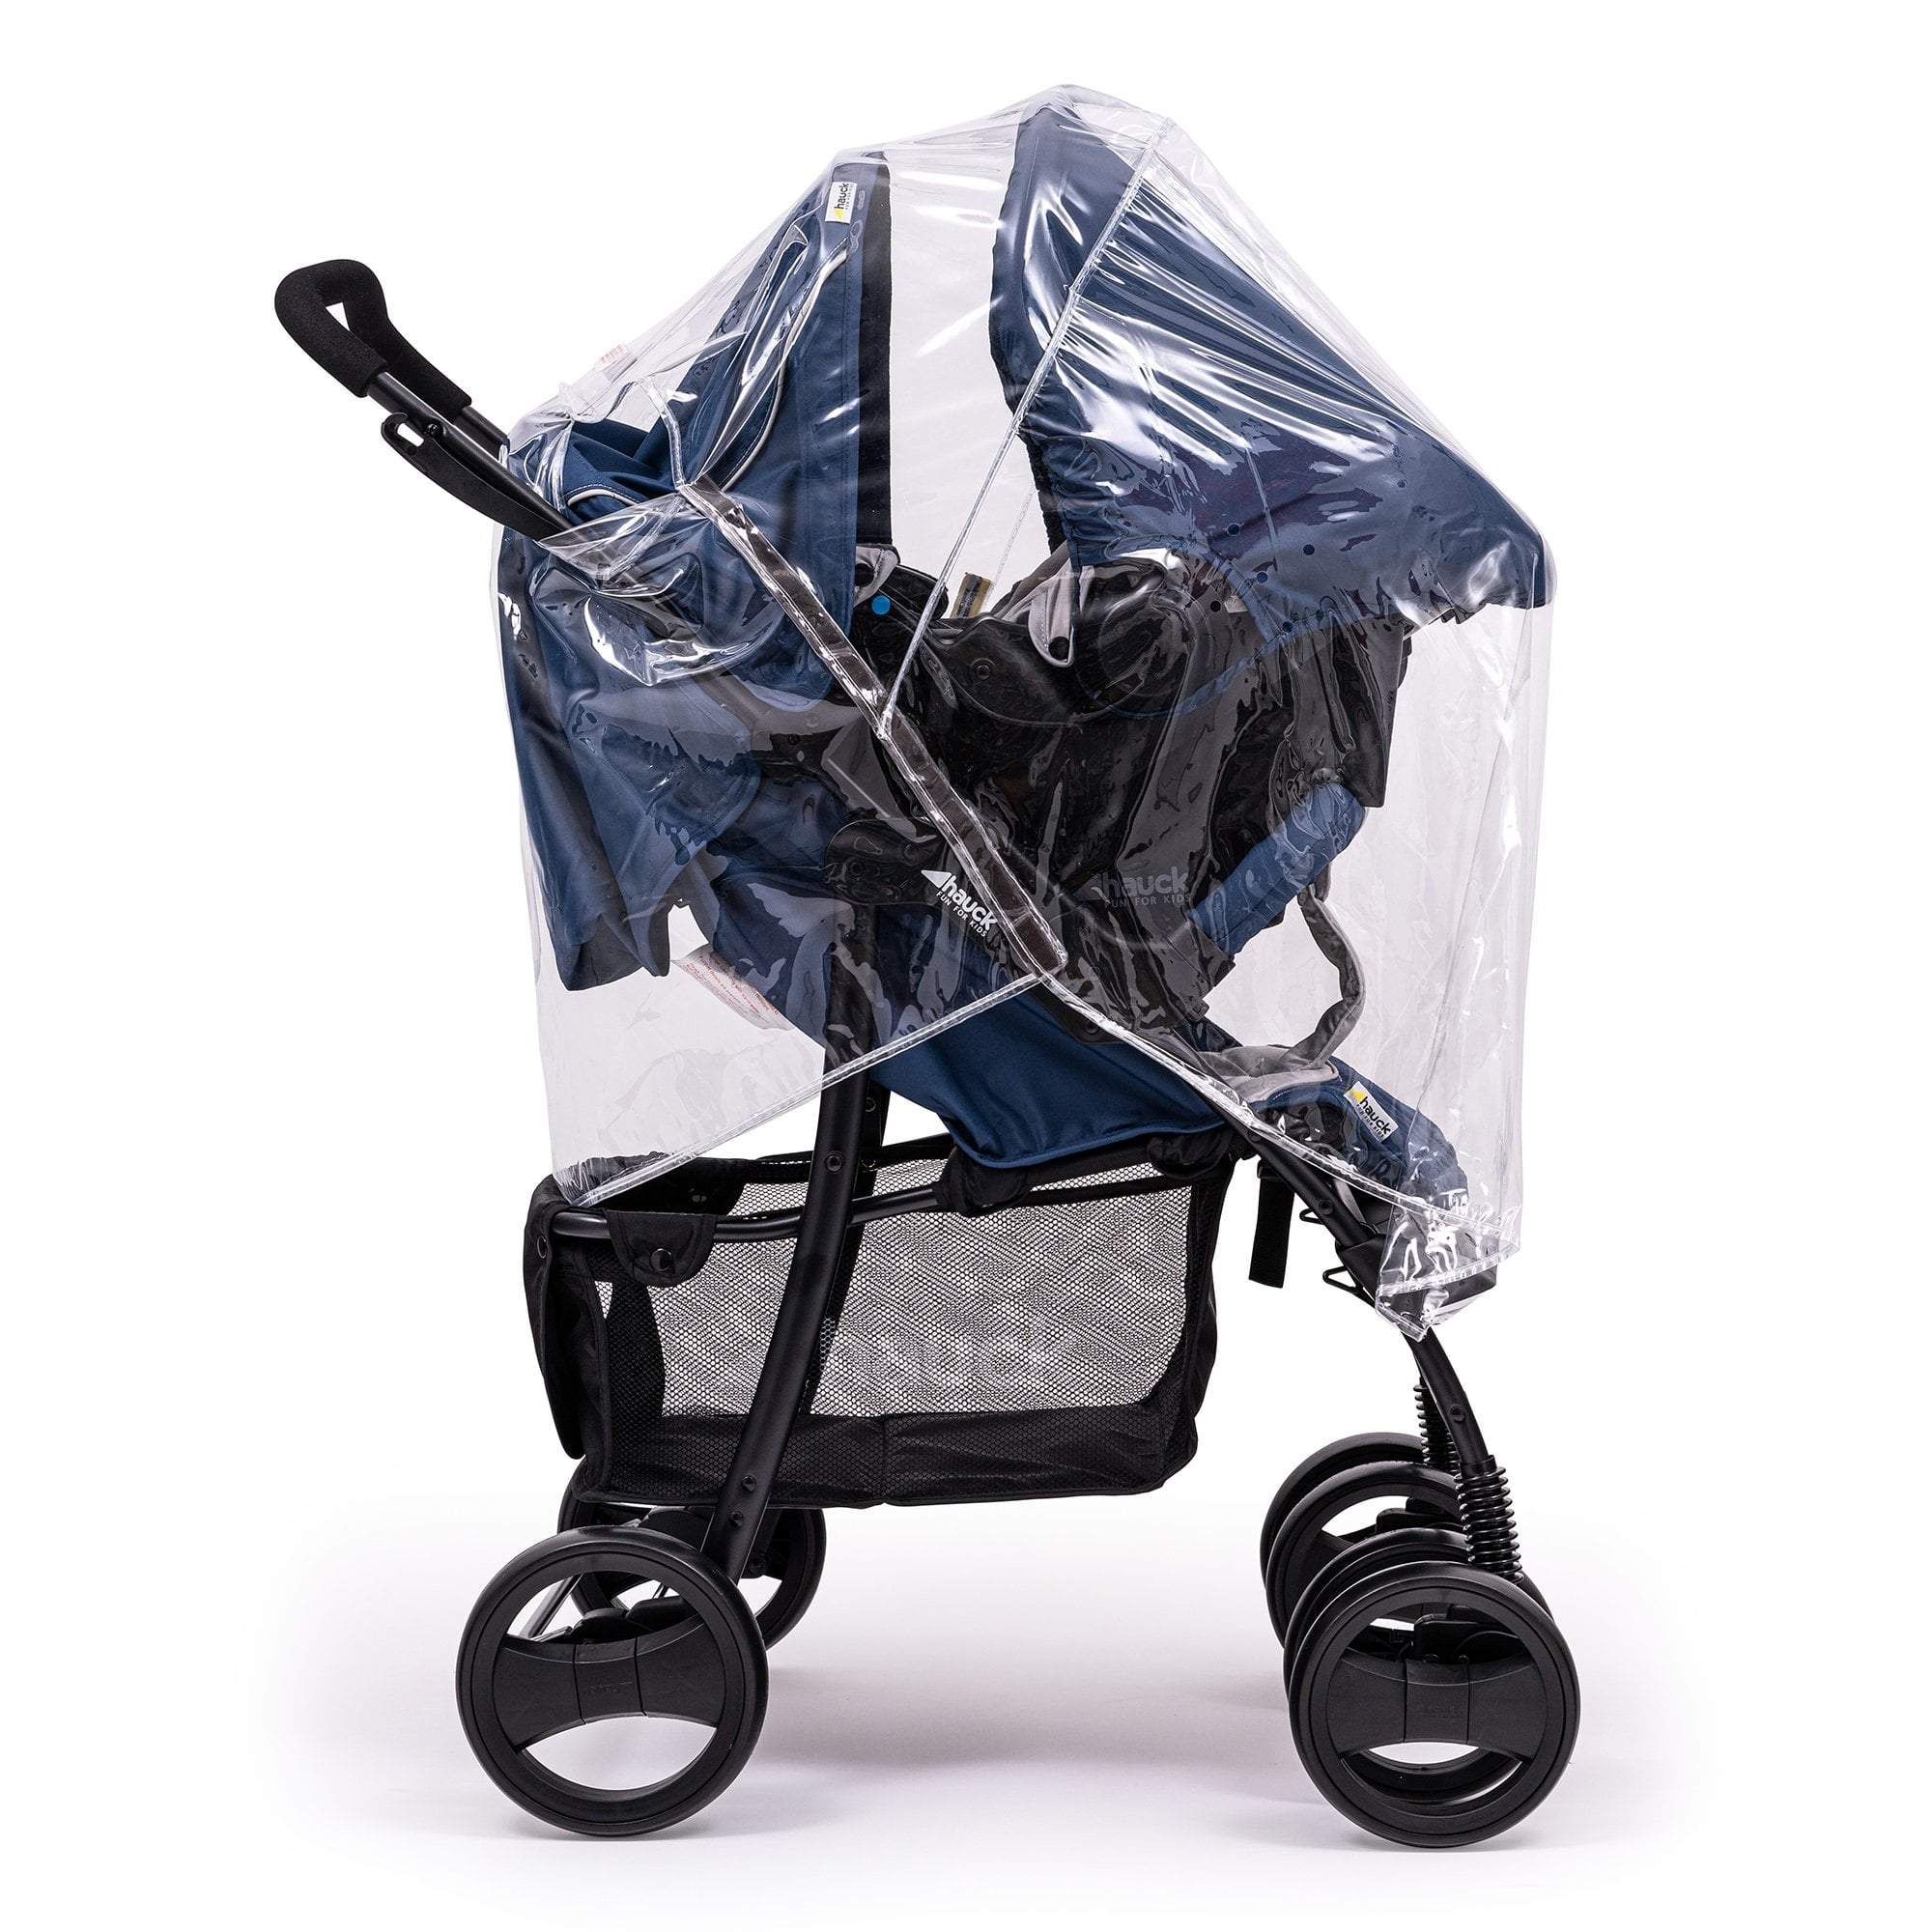 Travel System Raincover Compatible with Seed - Fits All Models - For Your Little One